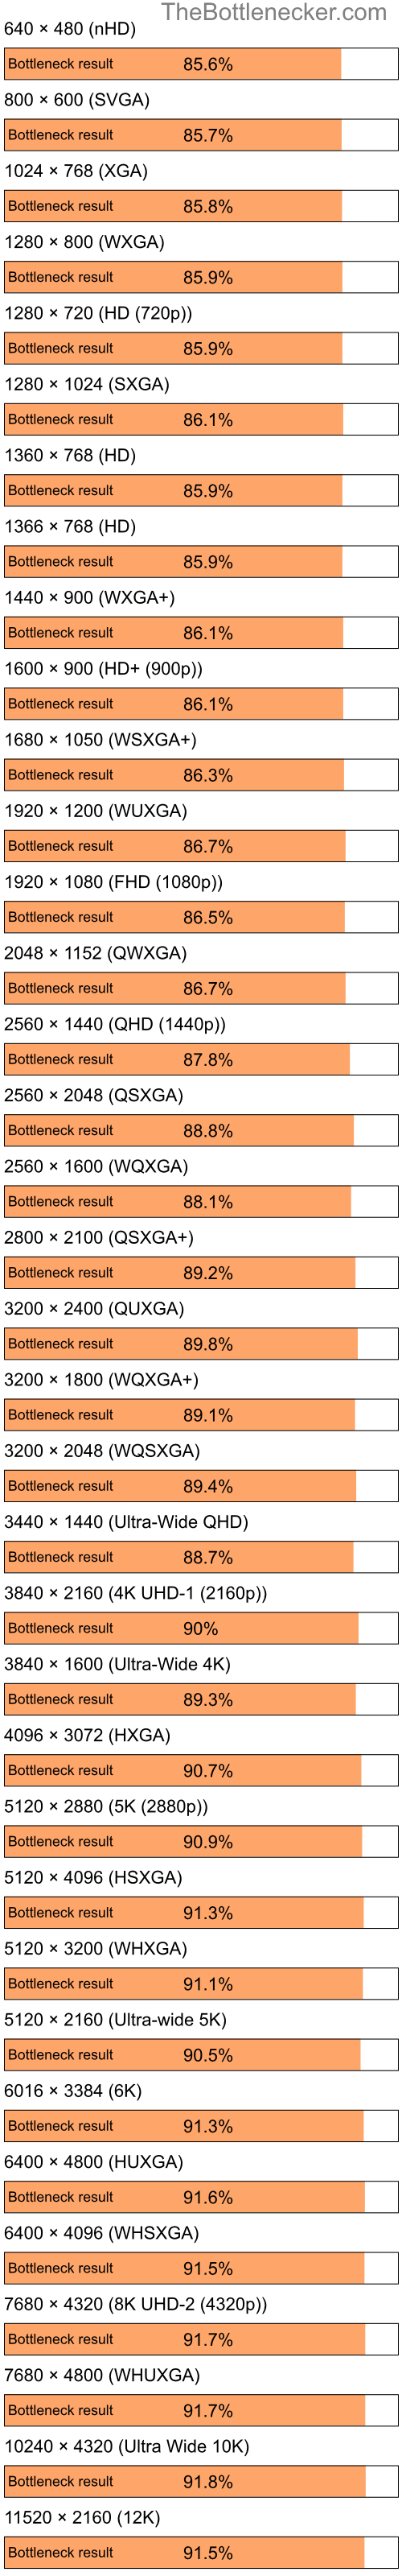 Bottleneck results by resolution for Intel Atom Z520 and NVIDIA nForce 630M in Graphic Card Intense Tasks